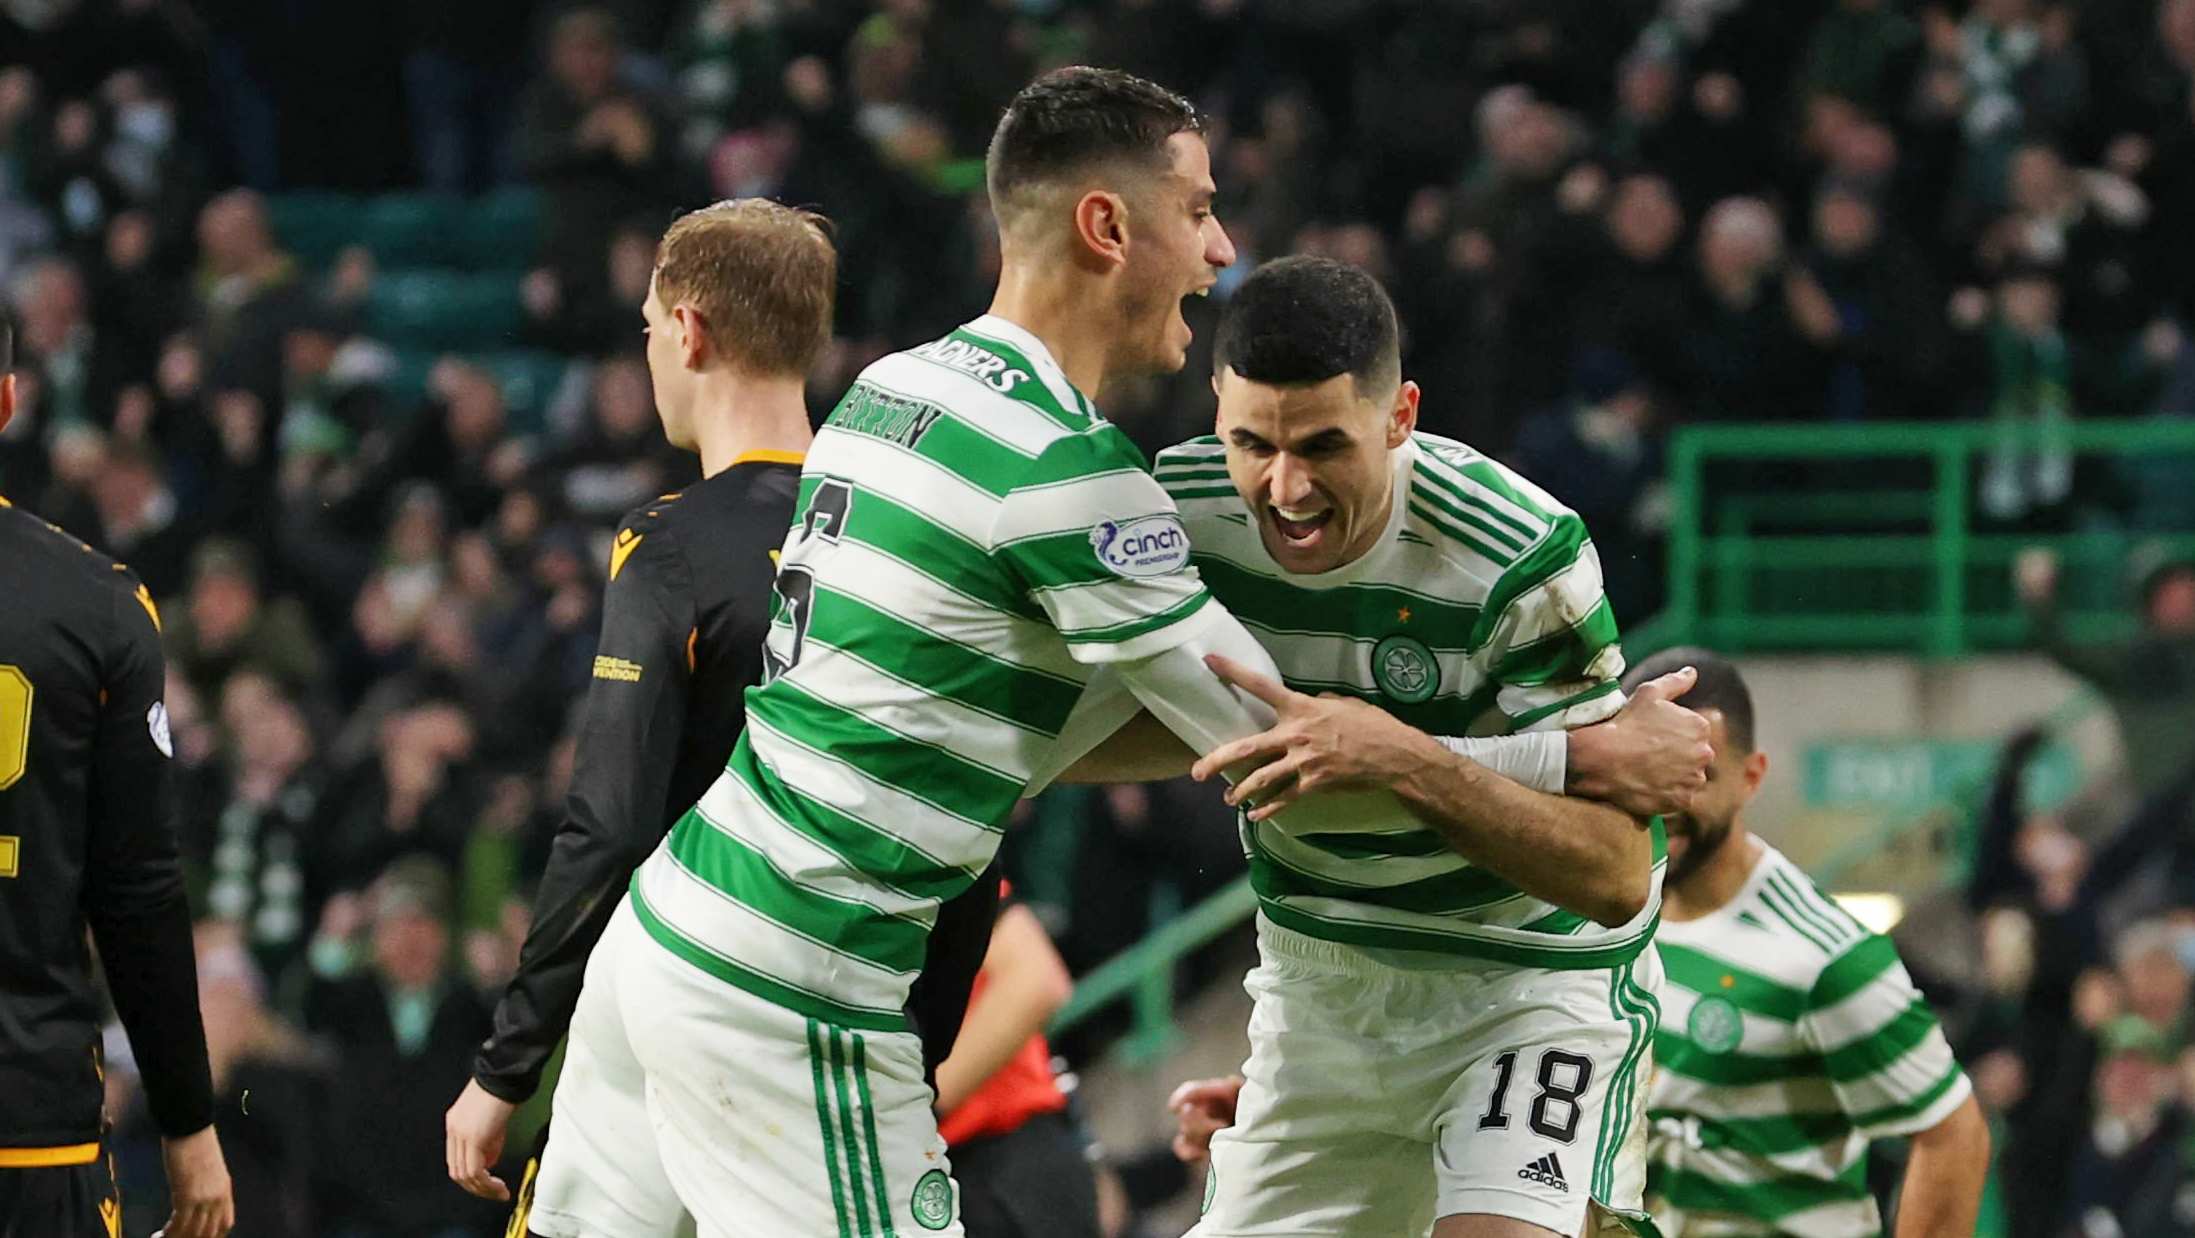 Bitton and Rogic have collected a combined 34 winners medals at Celtic.